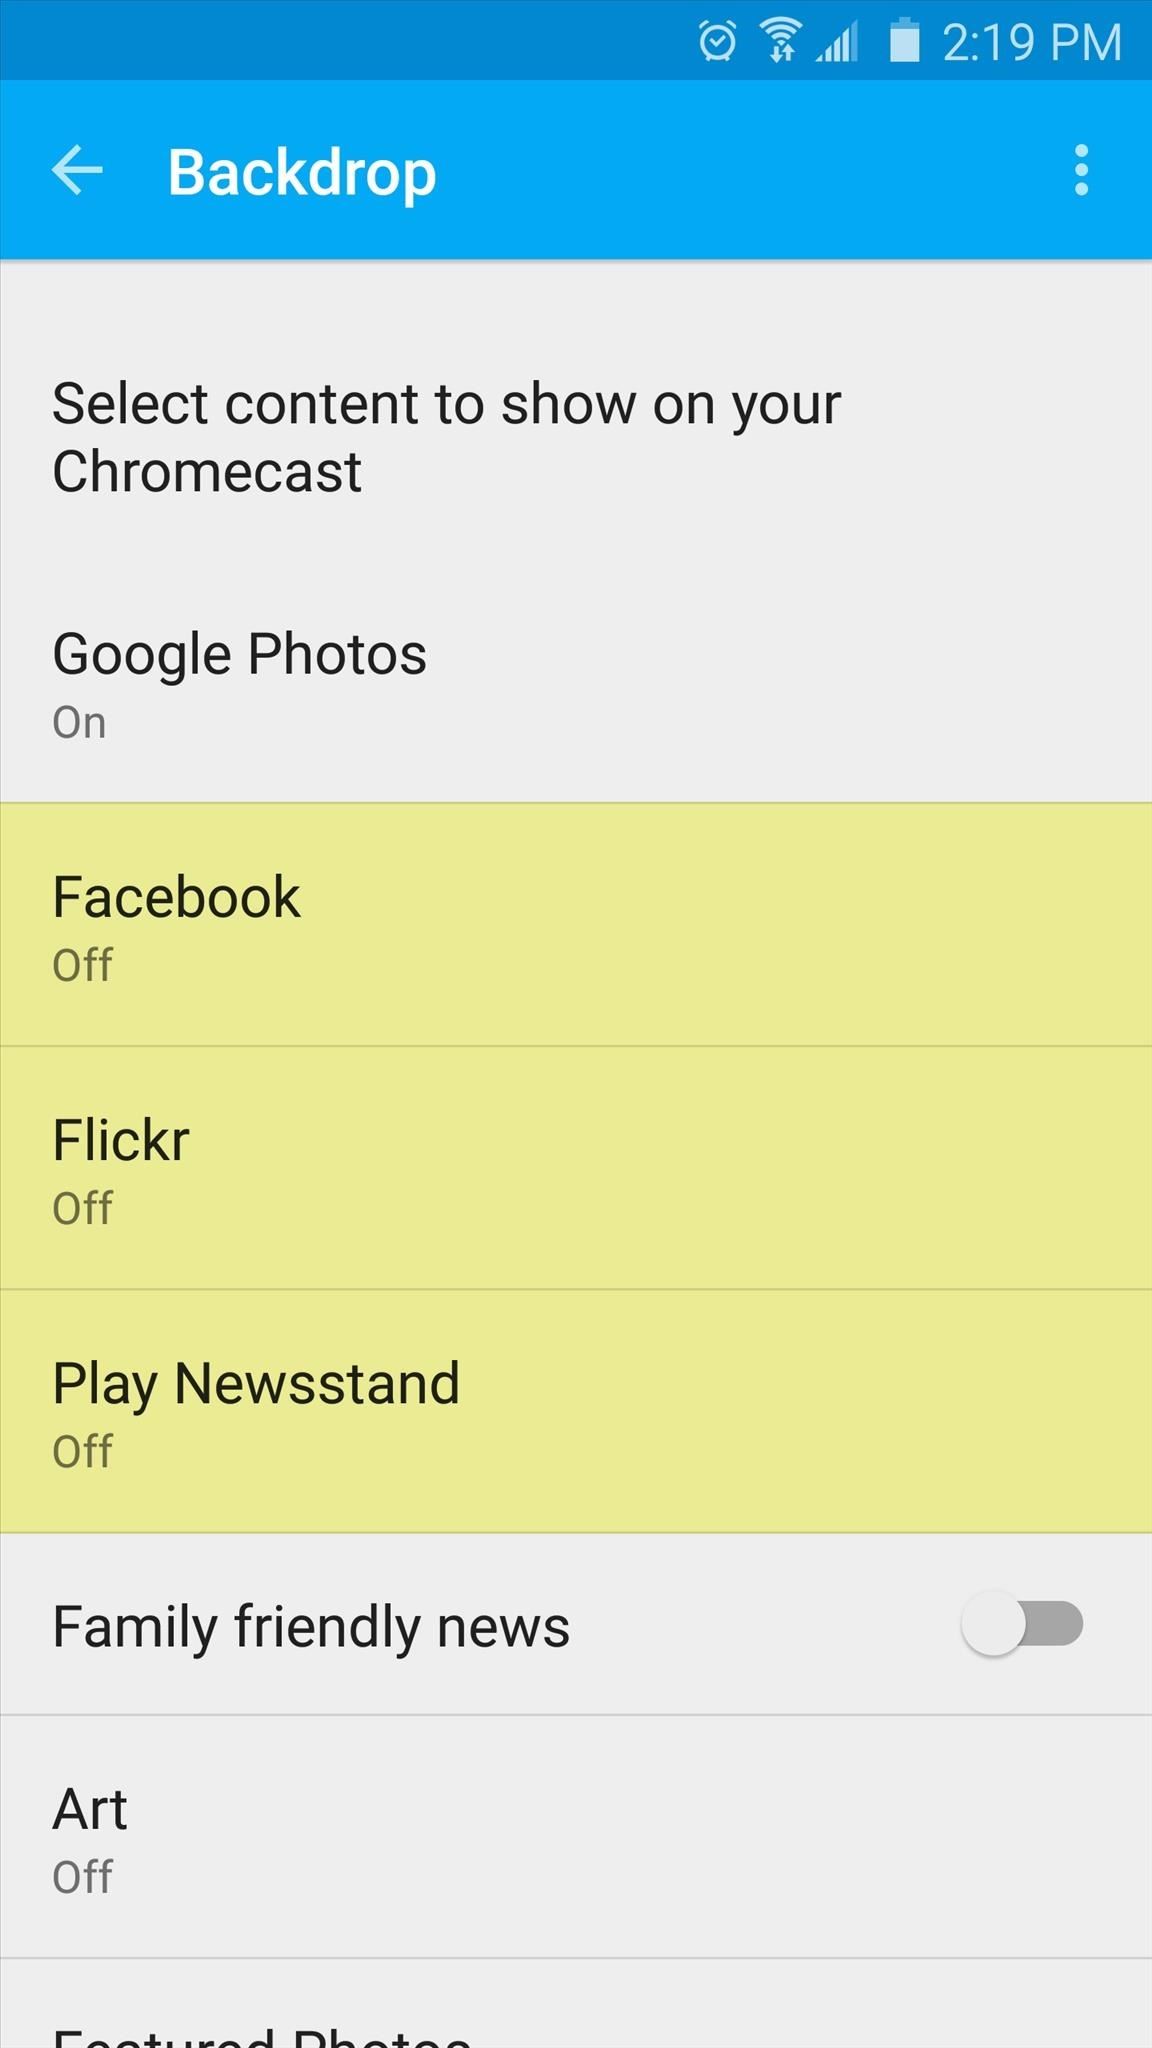 Chromecast App Gets a Huge Update—Here's All the Cool New Features